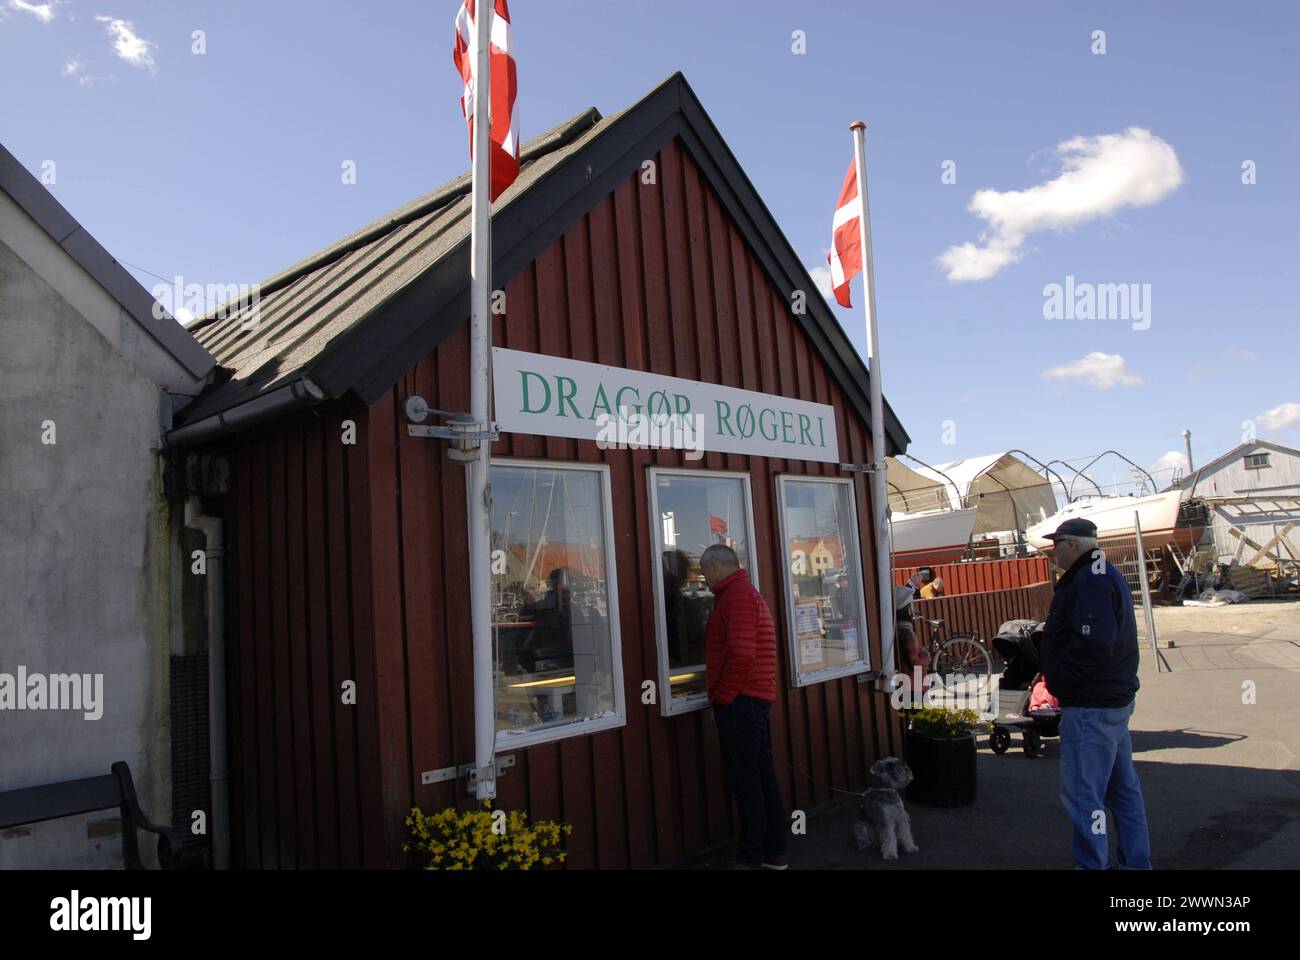 DRAGOR/DRAGOER/.Denmark 22 April 2016  Dragor smokehouse dragør røgerionly sell smoke fish at small fishing habour .Photo. Francis Joseph Dean/Deanpictures. Stock Photo